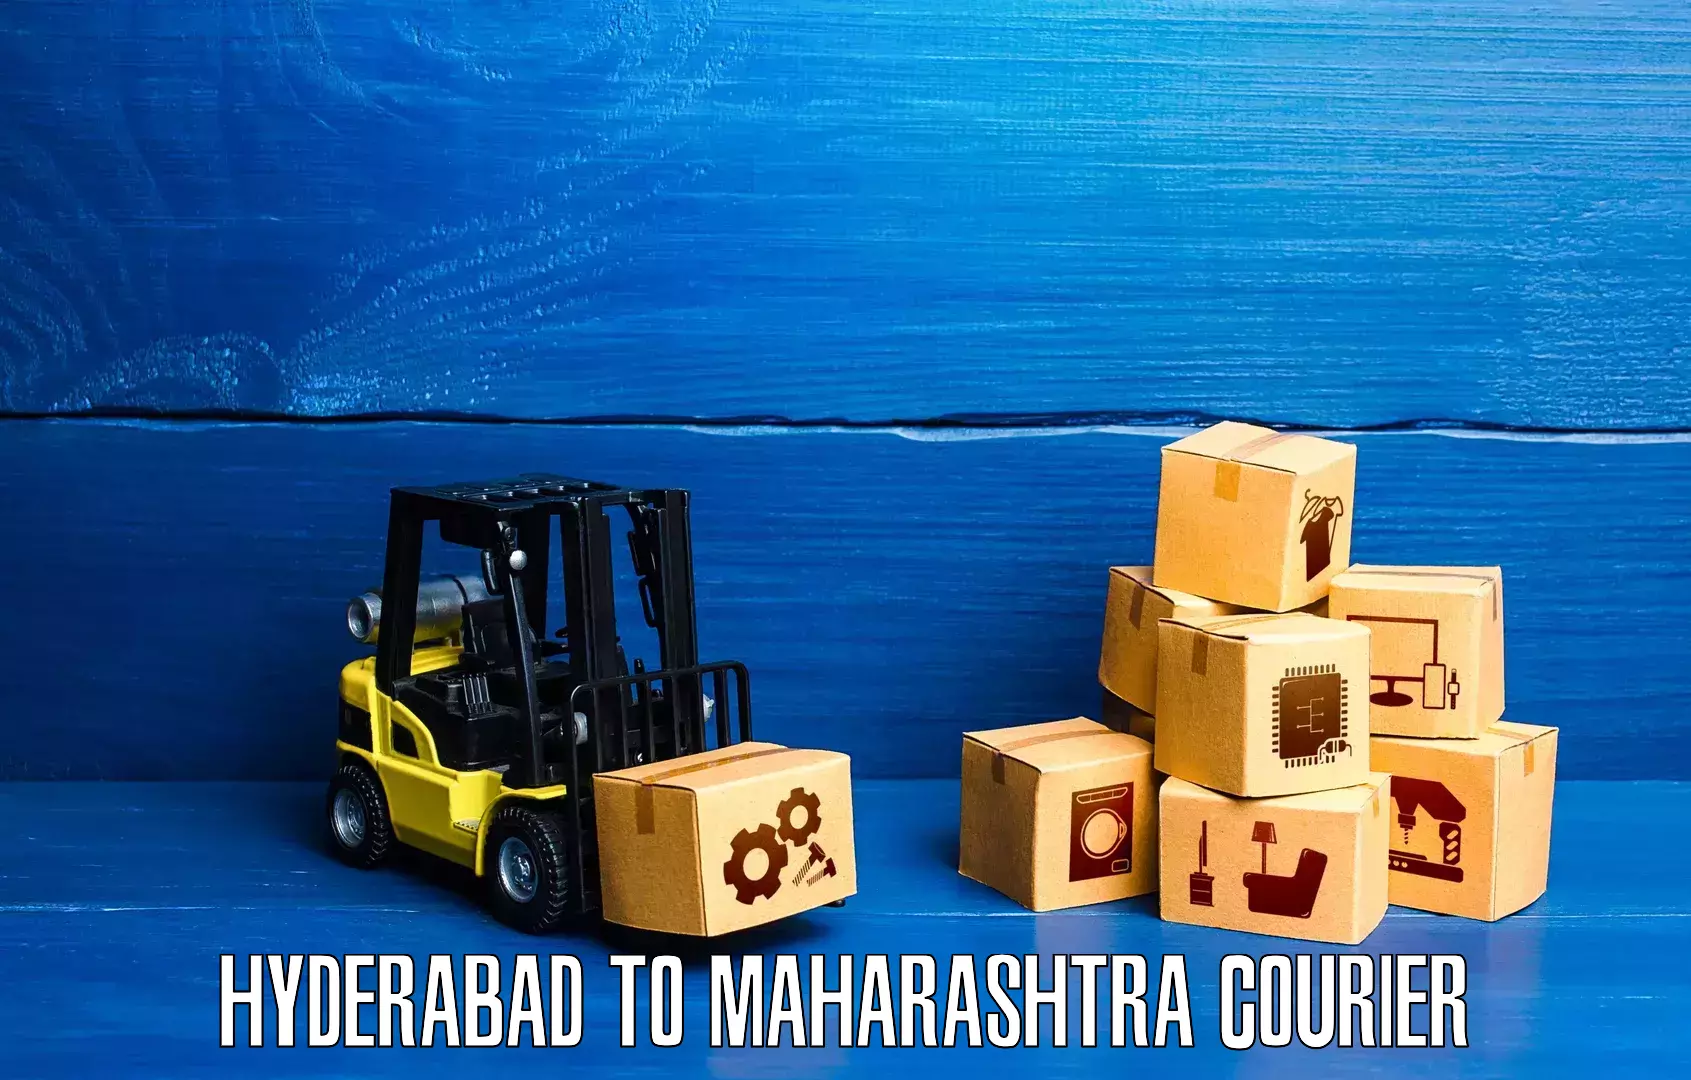 Courier service booking Hyderabad to Chembur